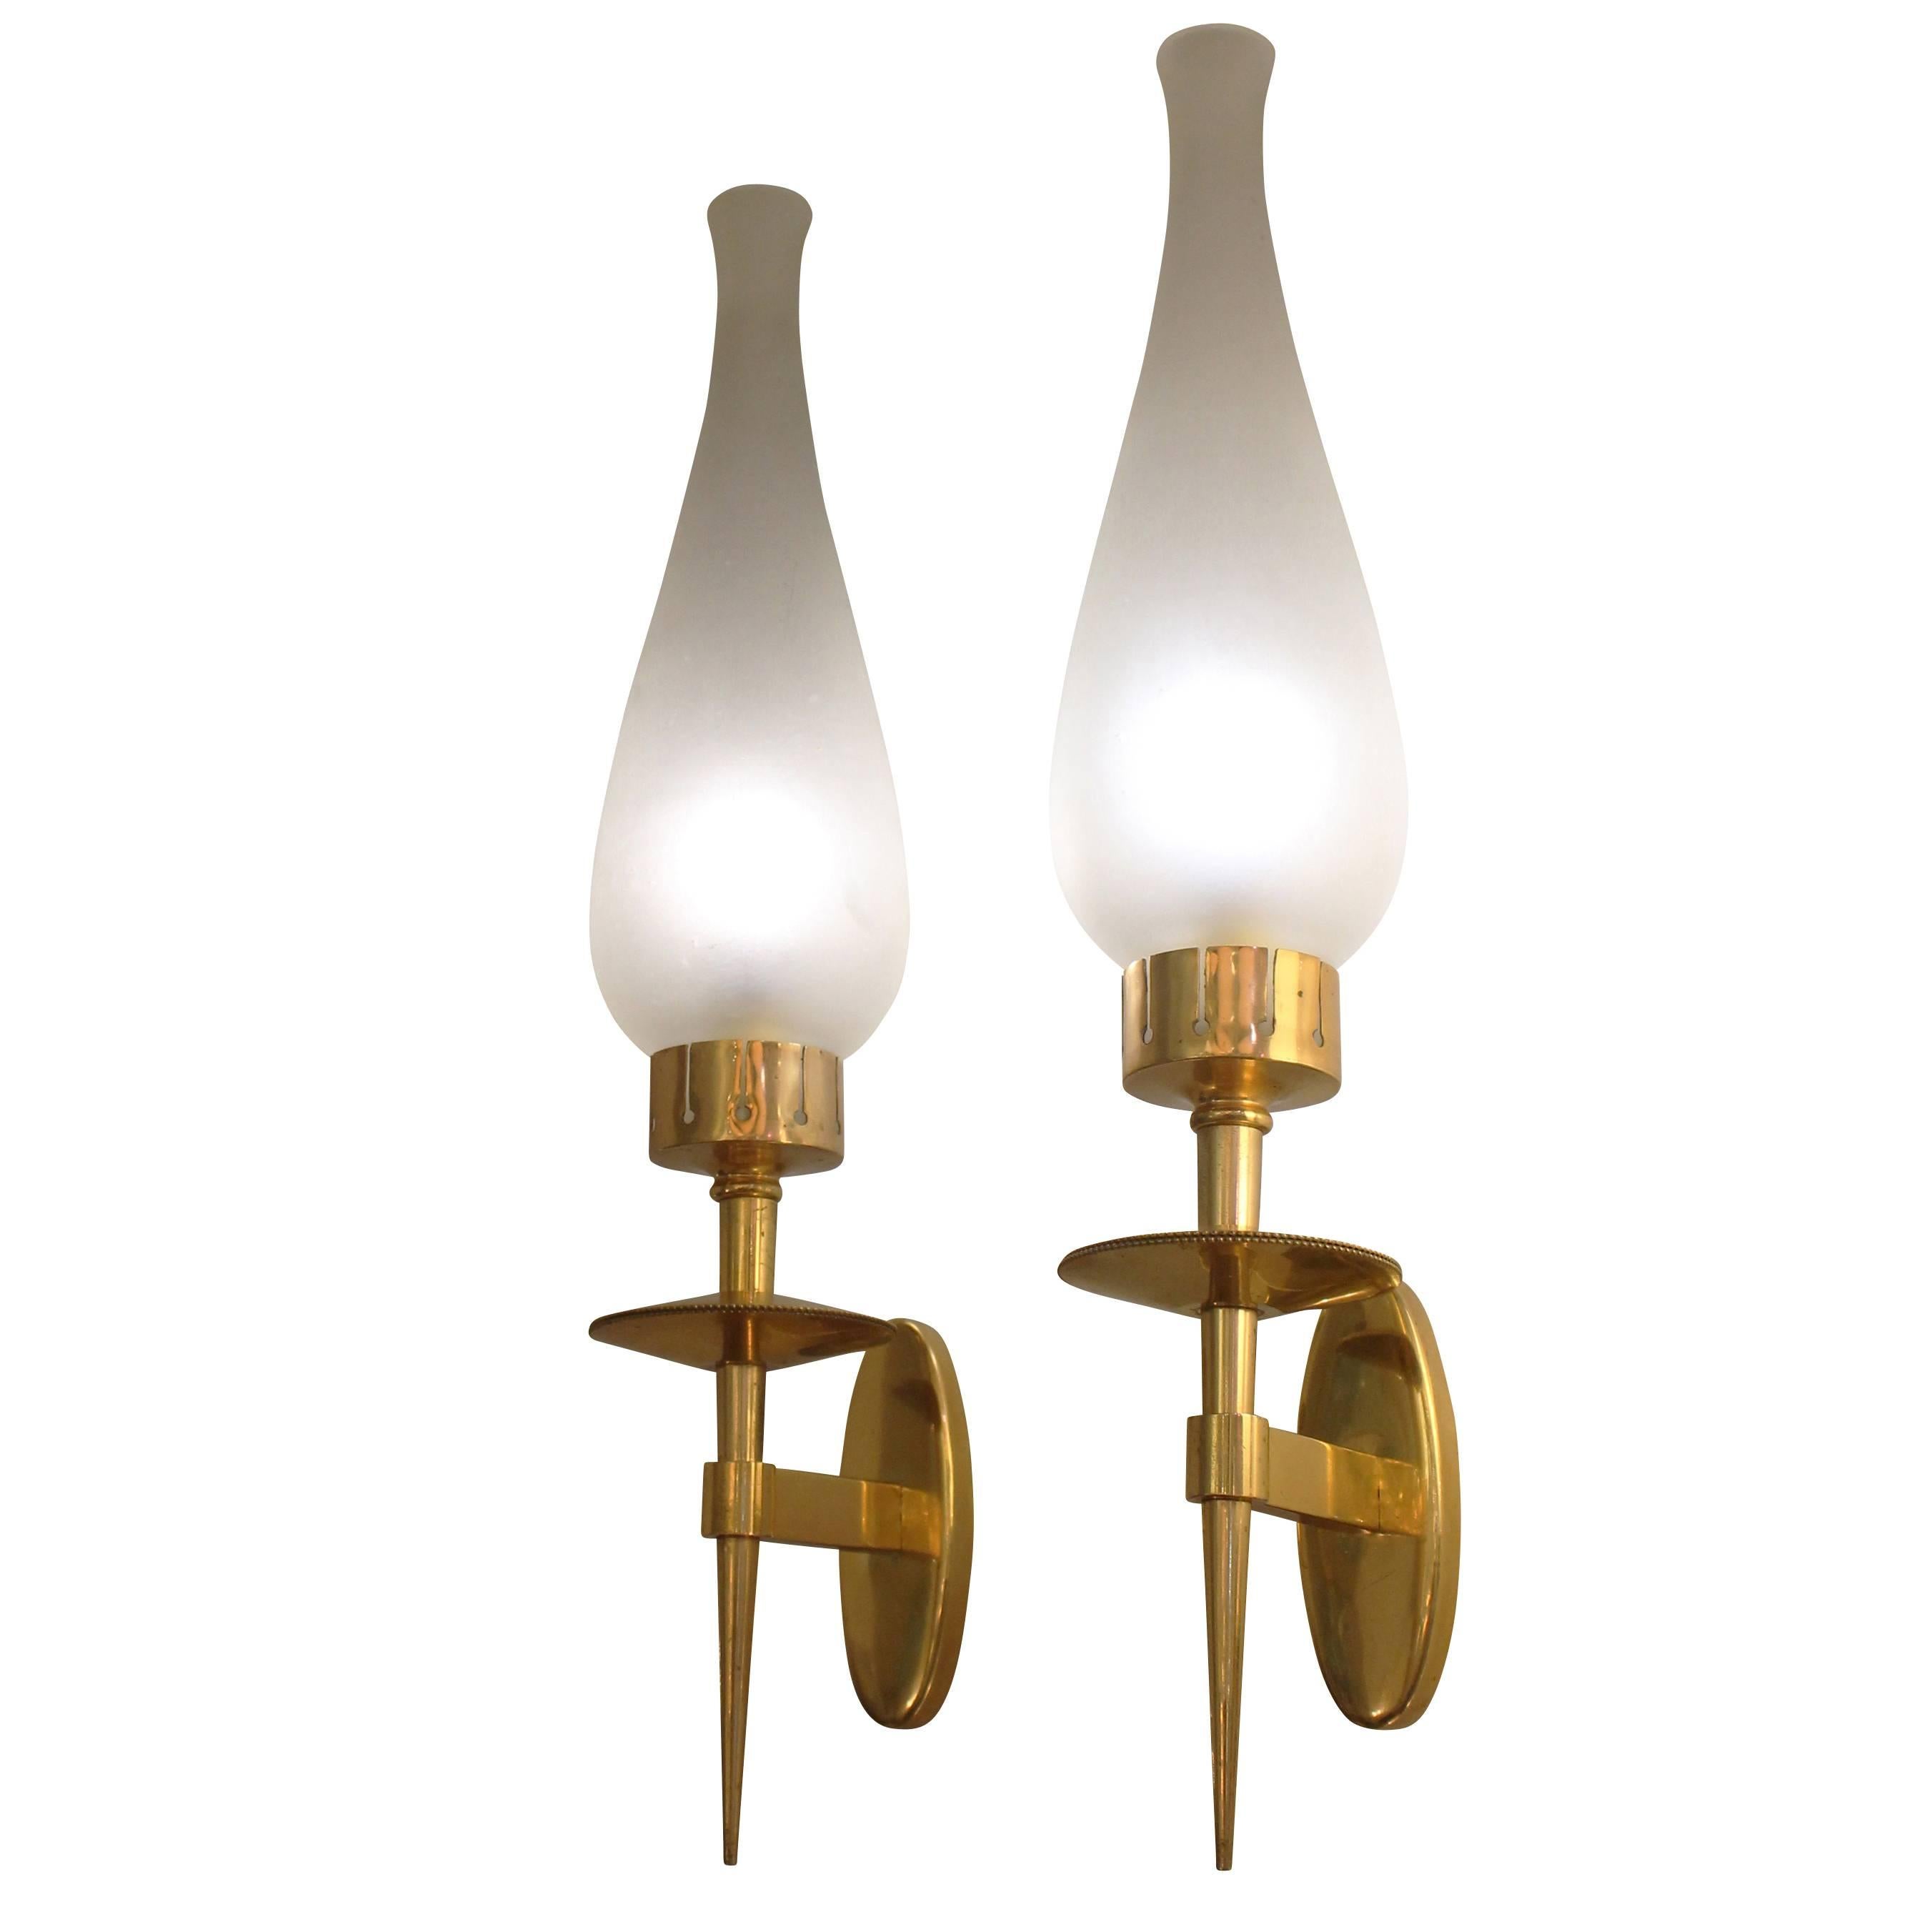 Pair of Sconces in the Manner of Arredoluce